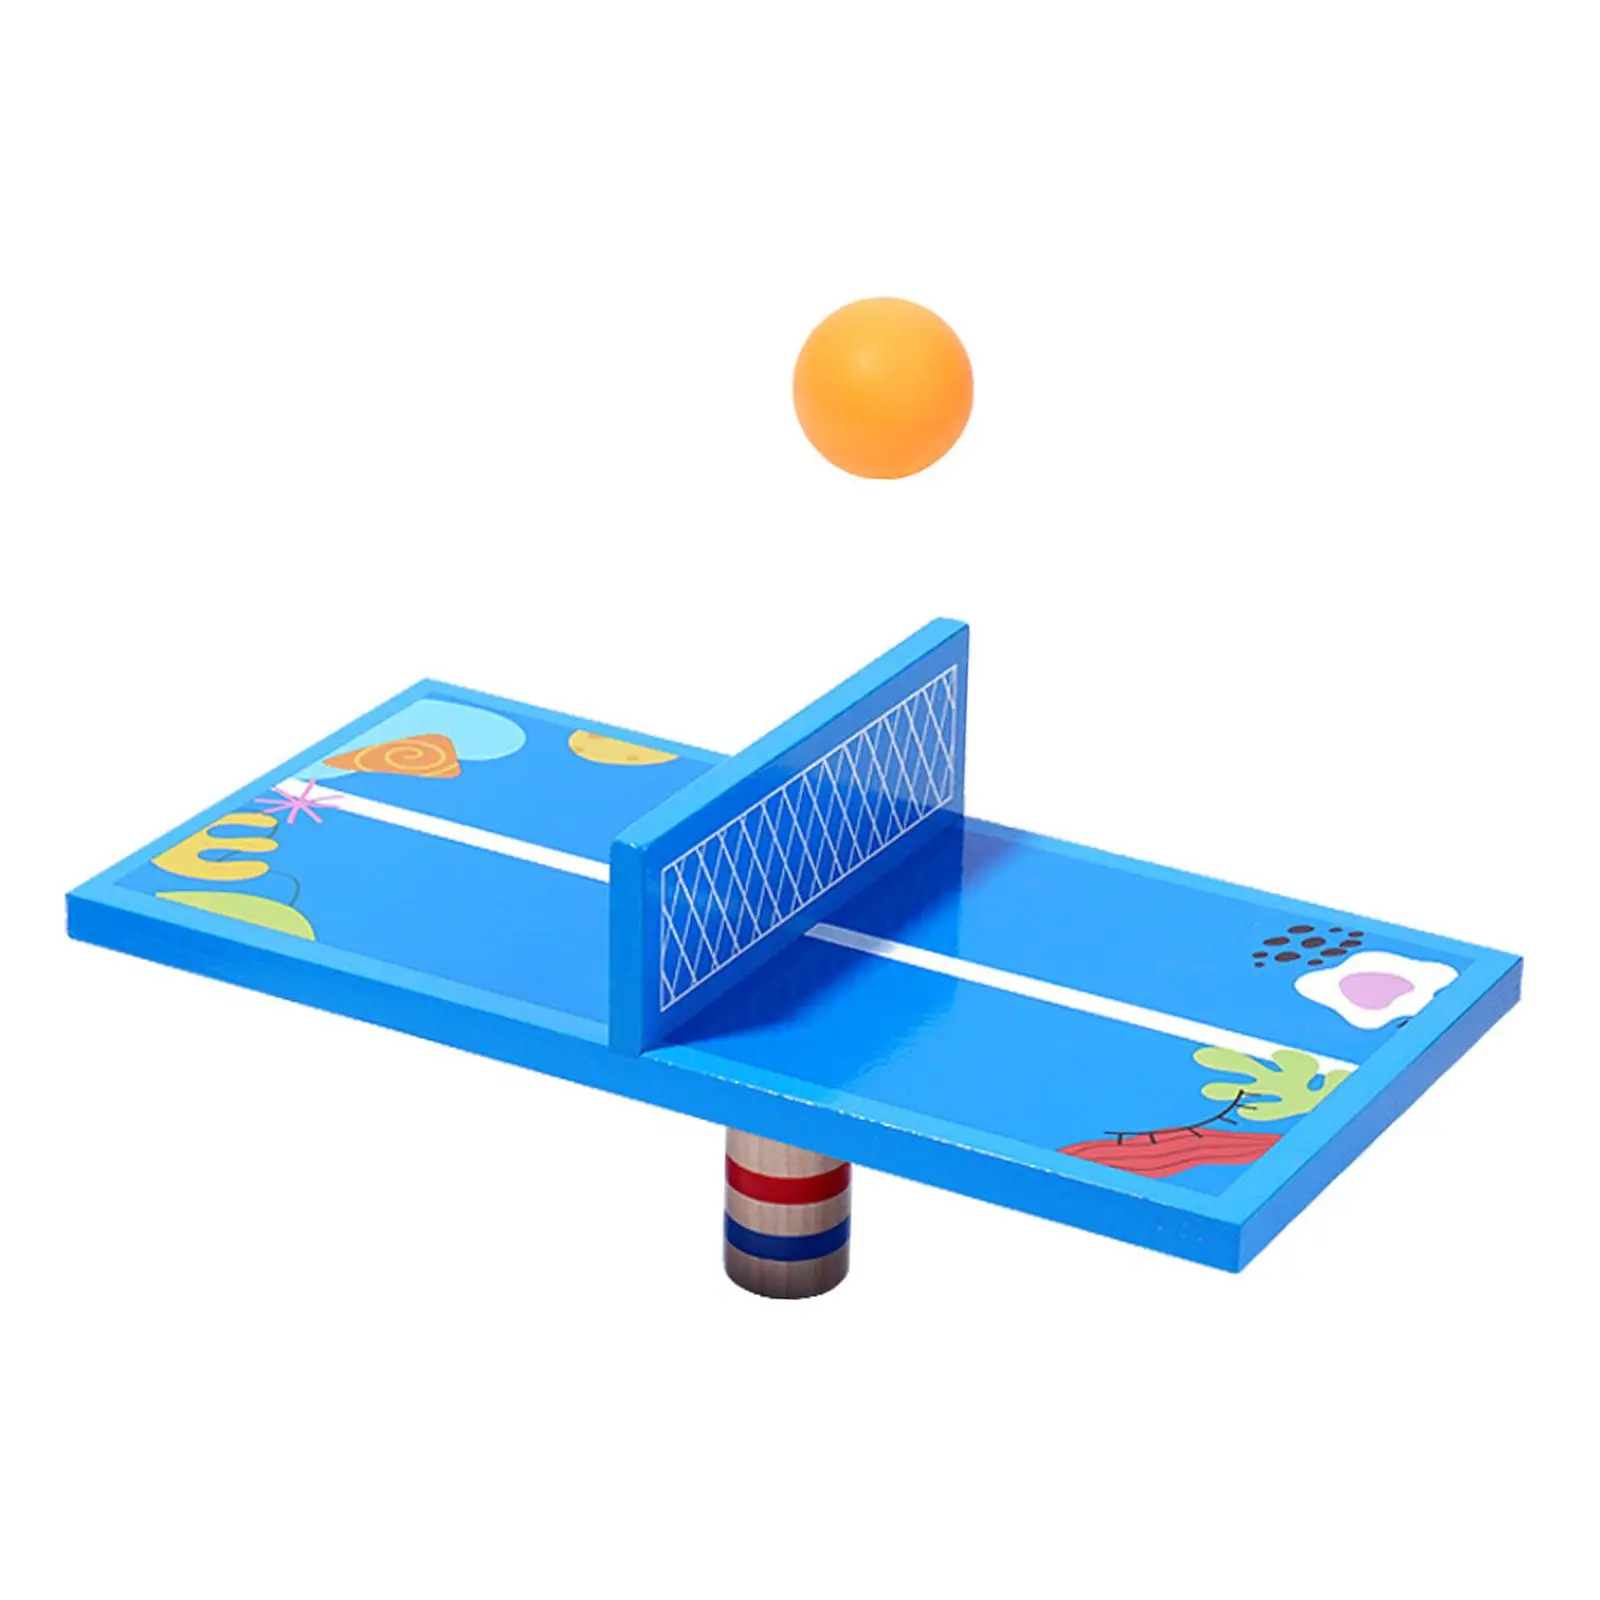 Mini Table Tennis Game Intellectual Developmental Portable Tabletop Game Early Educational Toy for Girls Kids Birthday Gifts